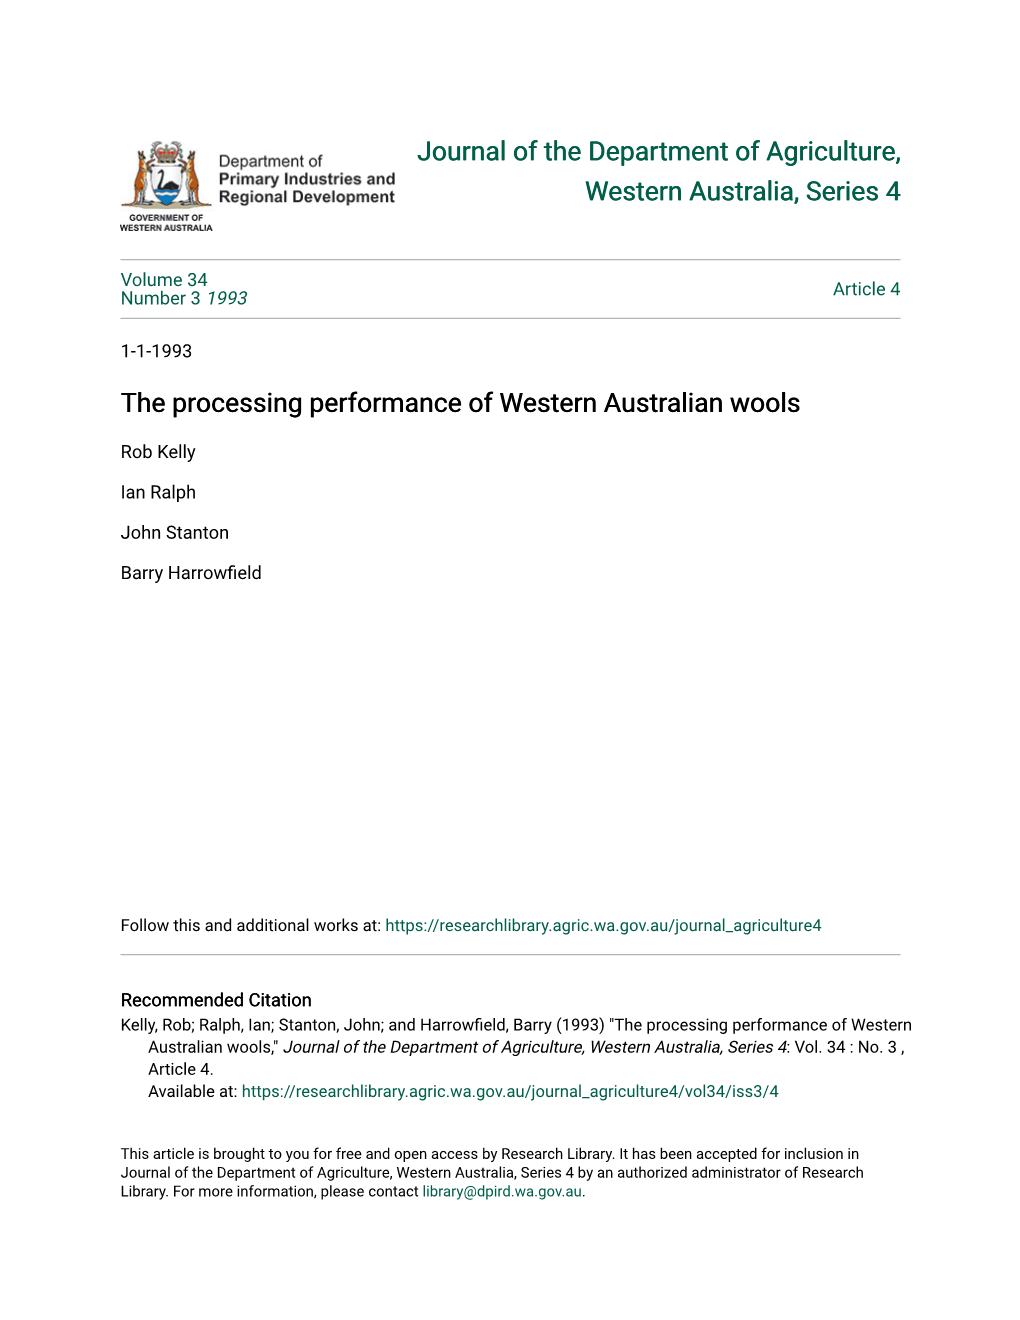 The Processing Performance of Western Australian Wools